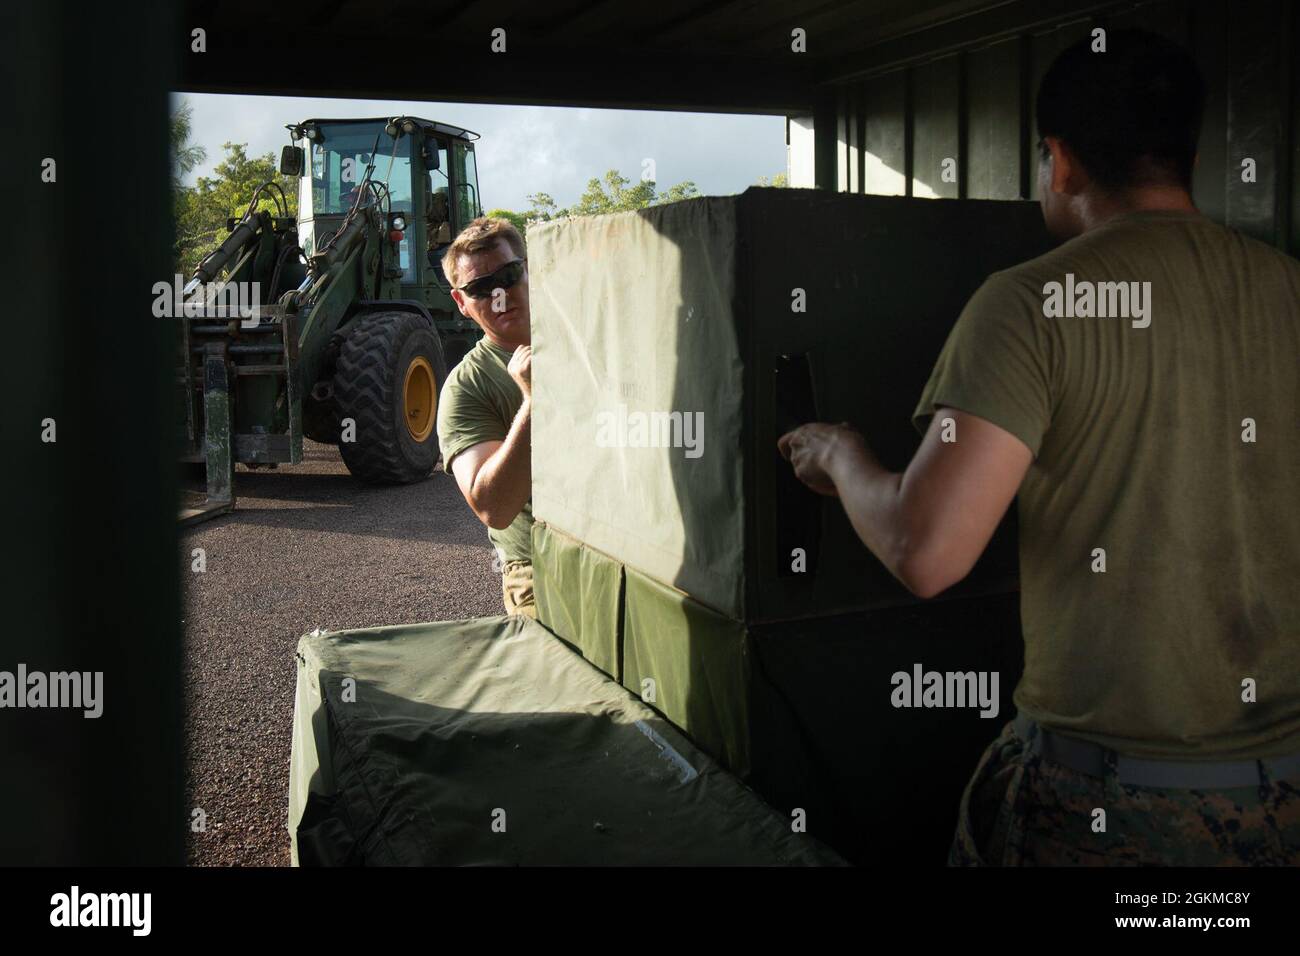 Australian Army Craftsman Benjamin Flavell, left, helps unload a lightweight water purification system during exercise Crocodile Response at Point Fawcett, NT, Australia, May 25, 2021. Using the Marine Corps’ LWPS, Marines and Australian Army soldiers exercised their ability to purify water during a simulated natural disaster. Exercise Crocodile Response tested the ability of MRF-D and the Australian Defence Force to provide disaster relief in the Indo-Pacific region. Stock Photo